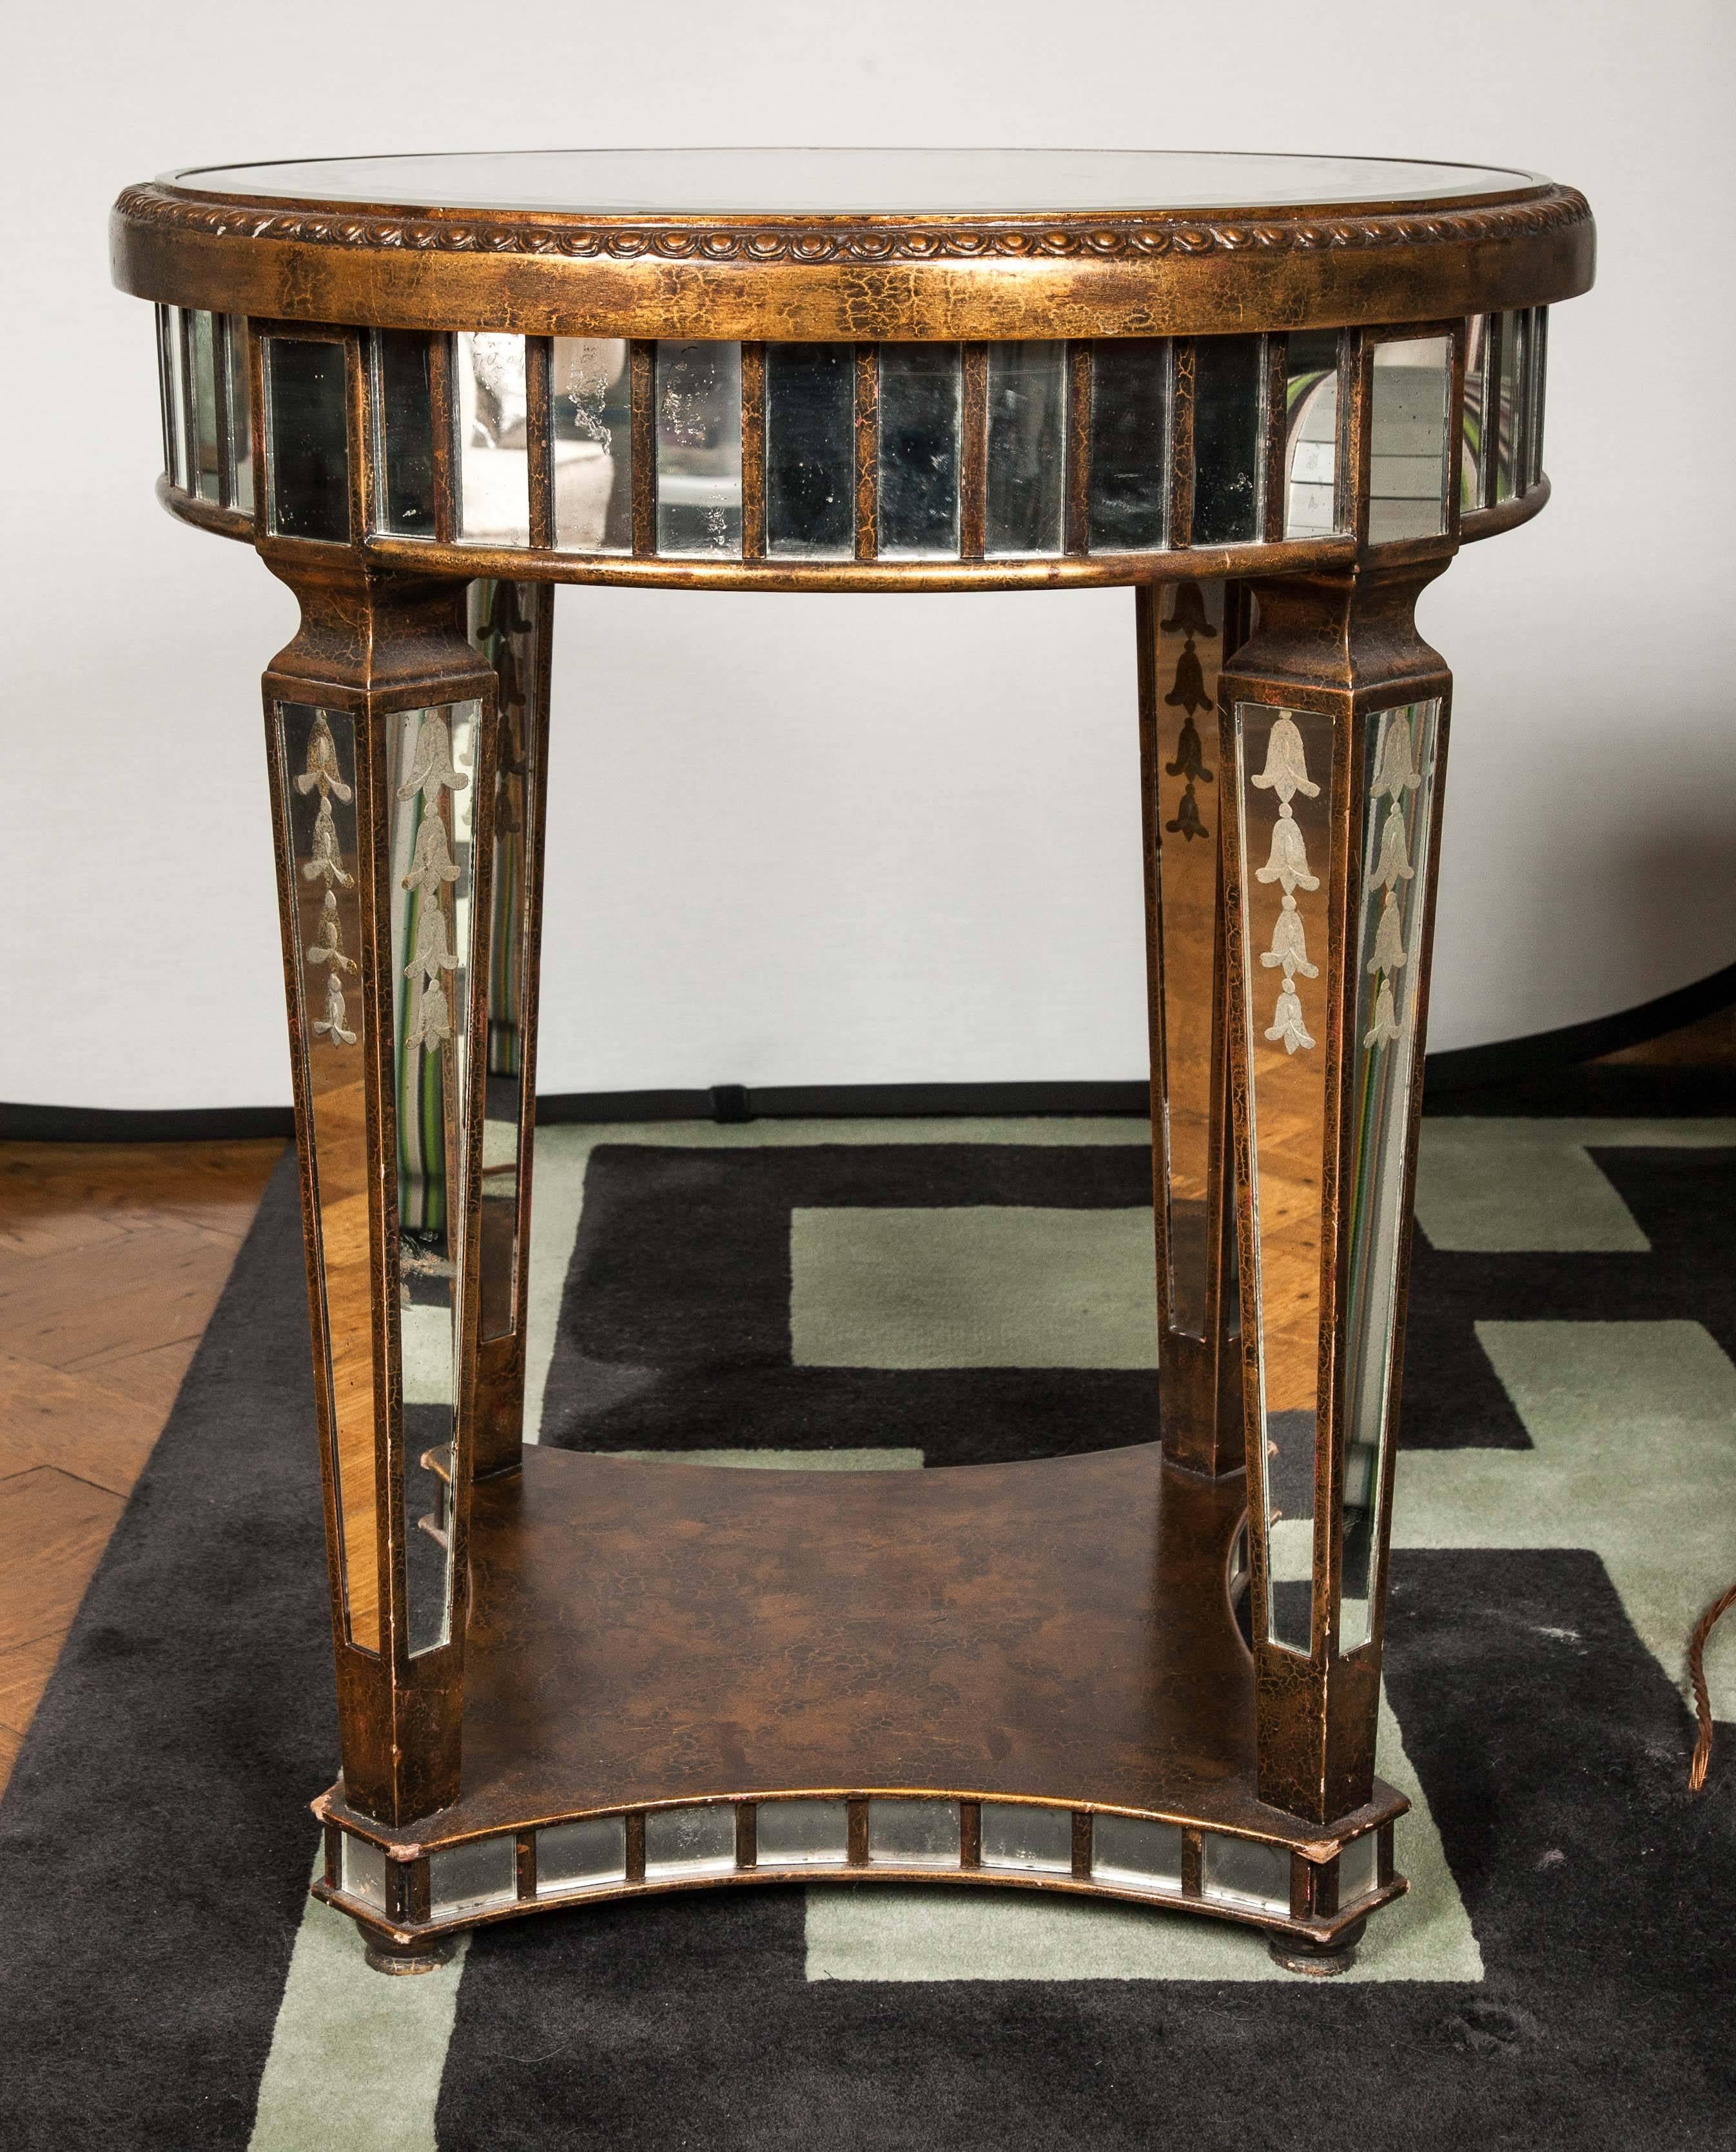 Ornate Etched Round Mirrored Table with Tapered Legs In Excellent Condition For Sale In London, GB